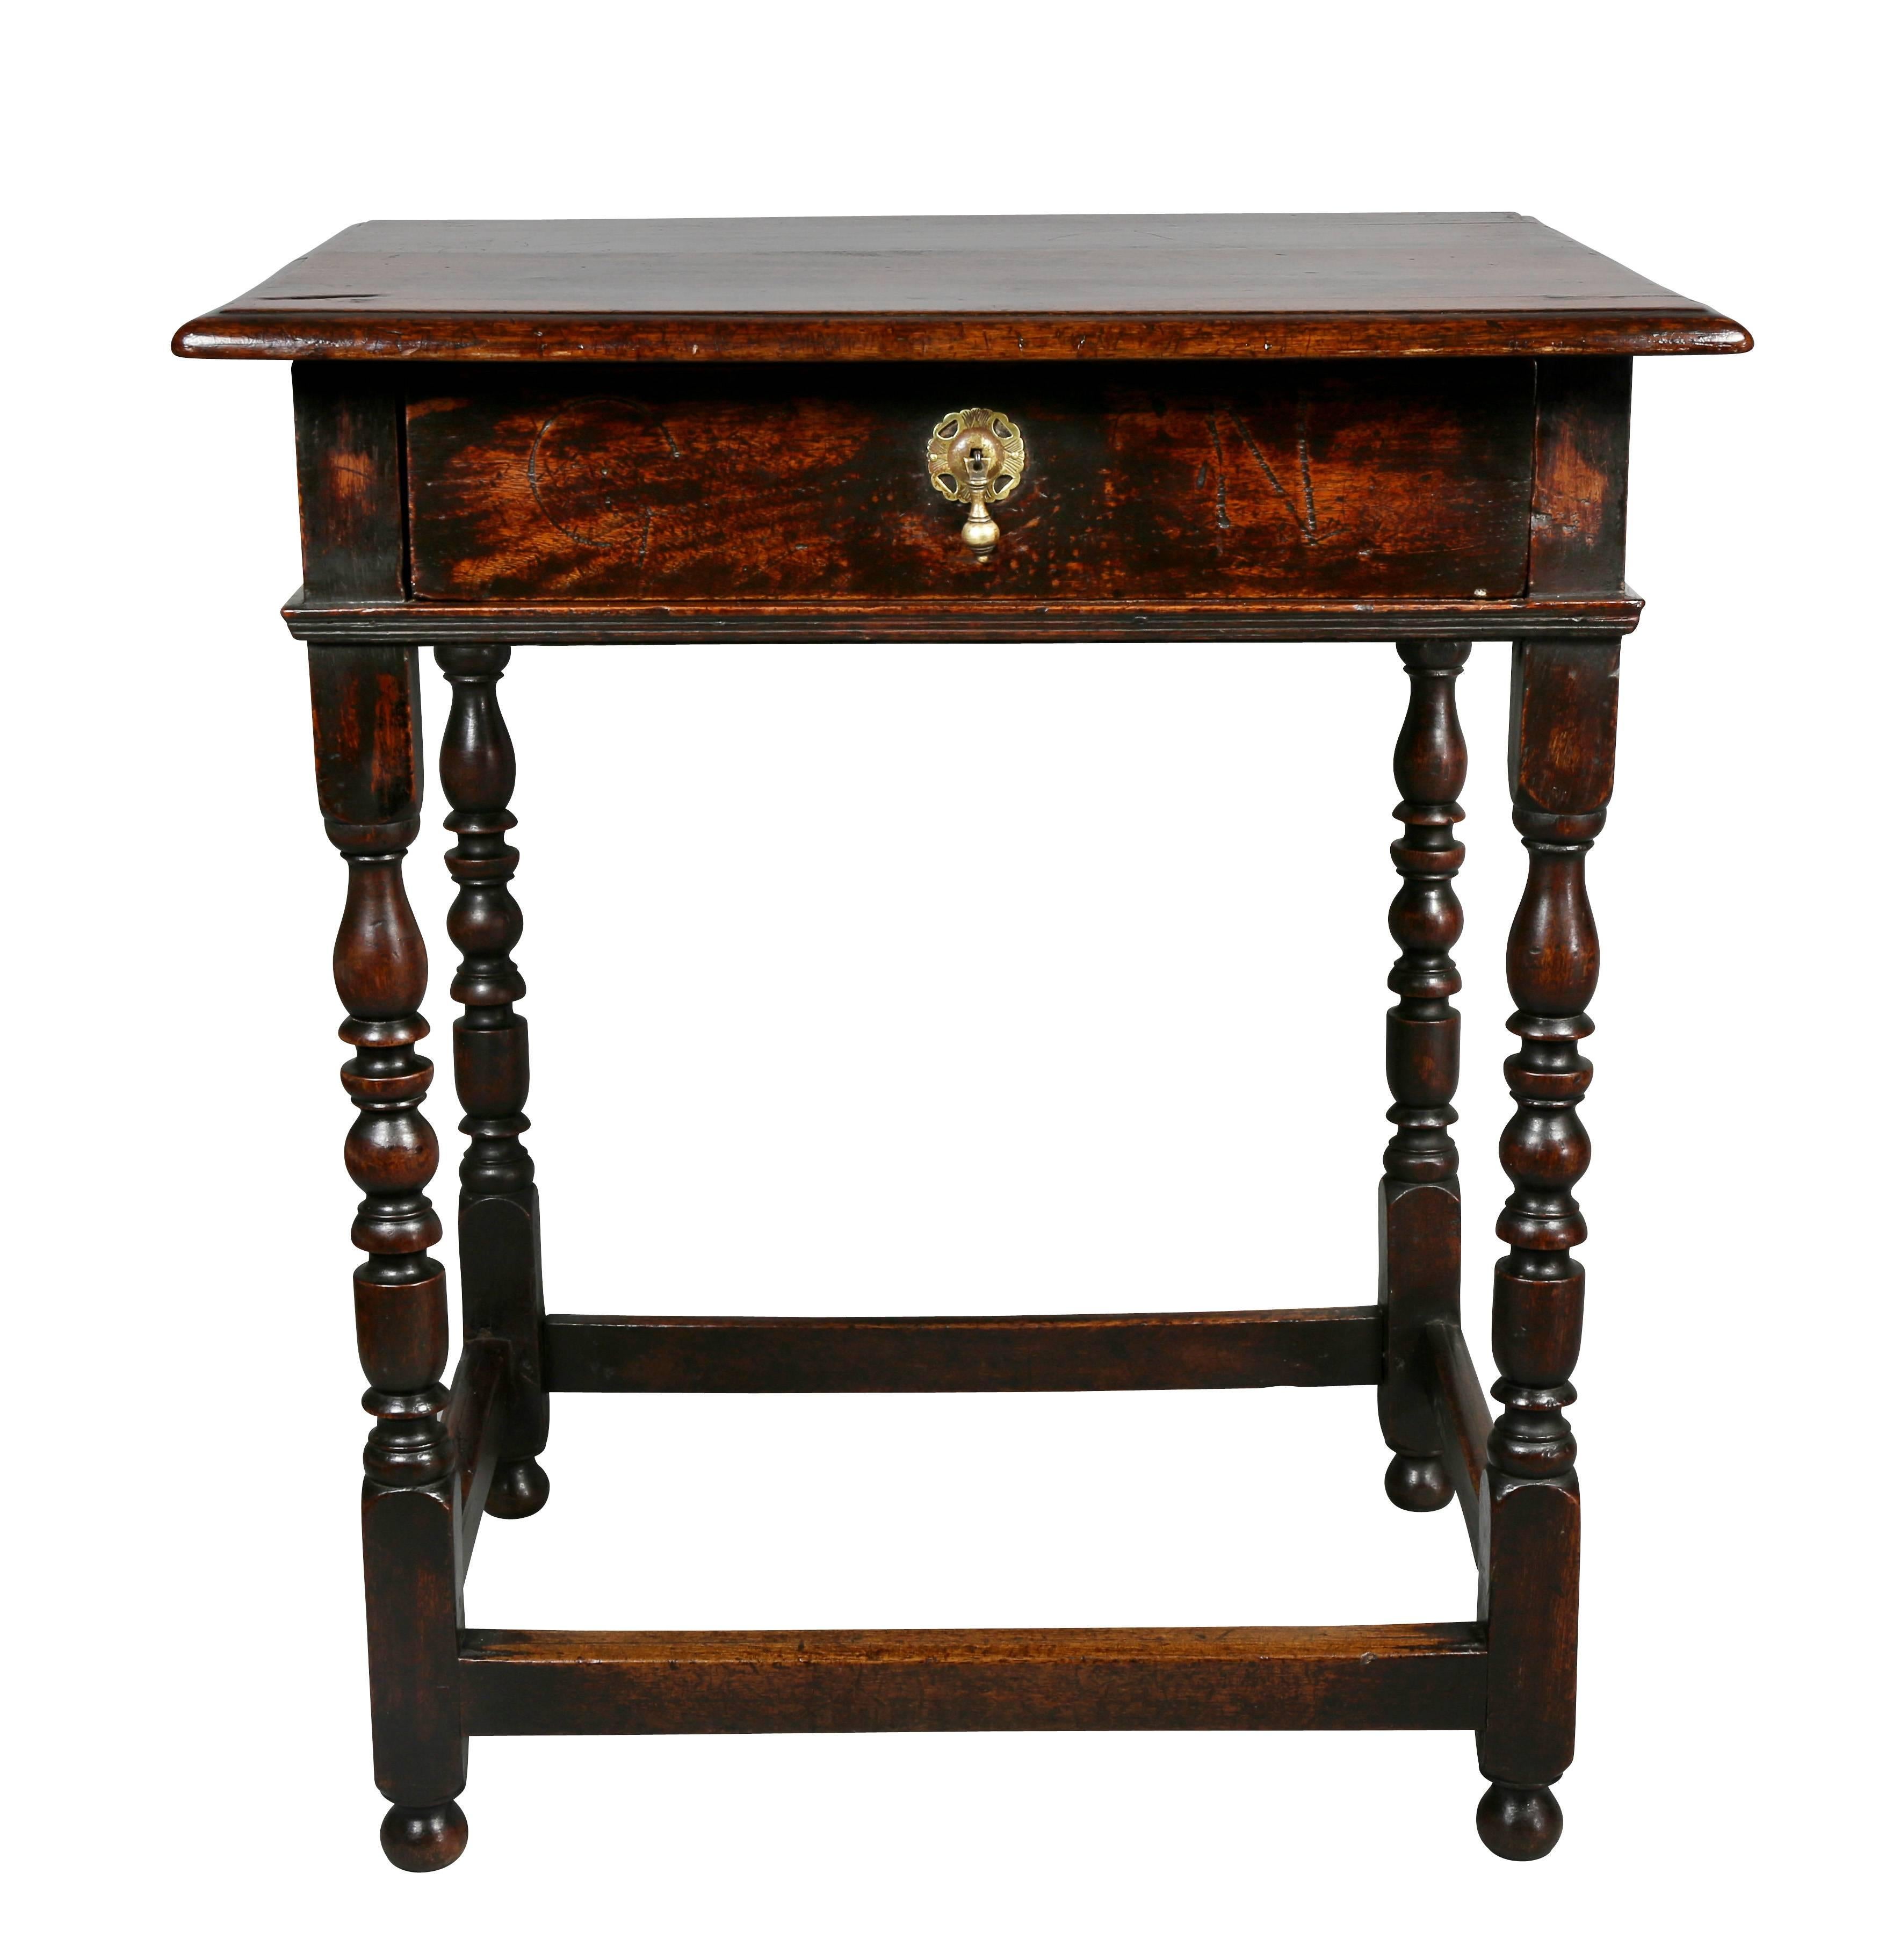 Rectangular molded top over a drawer with engraved initials GN. Raised on turned legs and box stretcher, button feet.